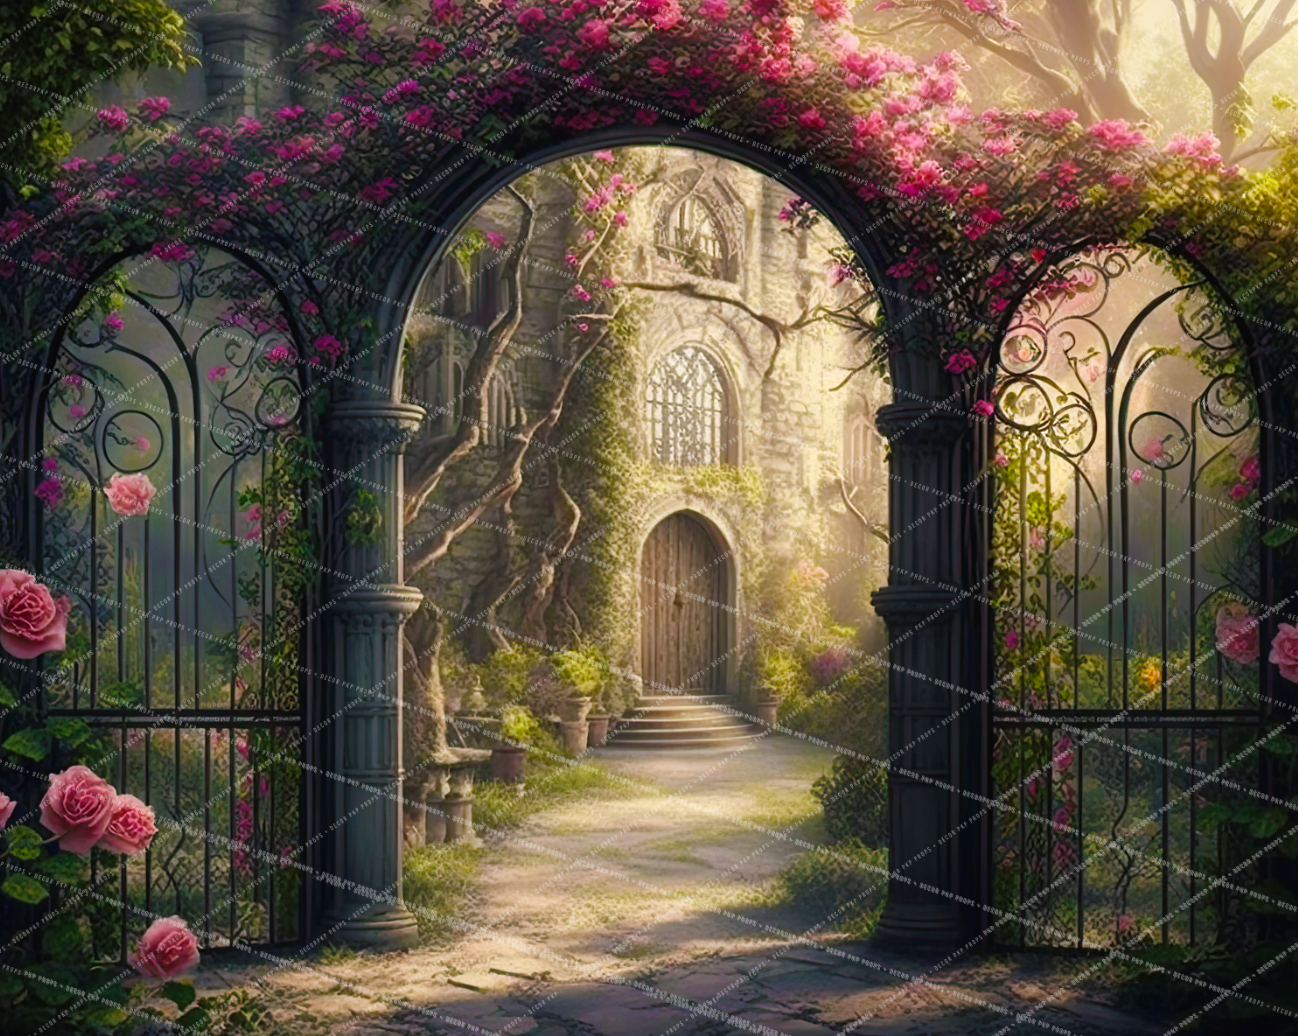 ROSE ARCH MANOR - PKP